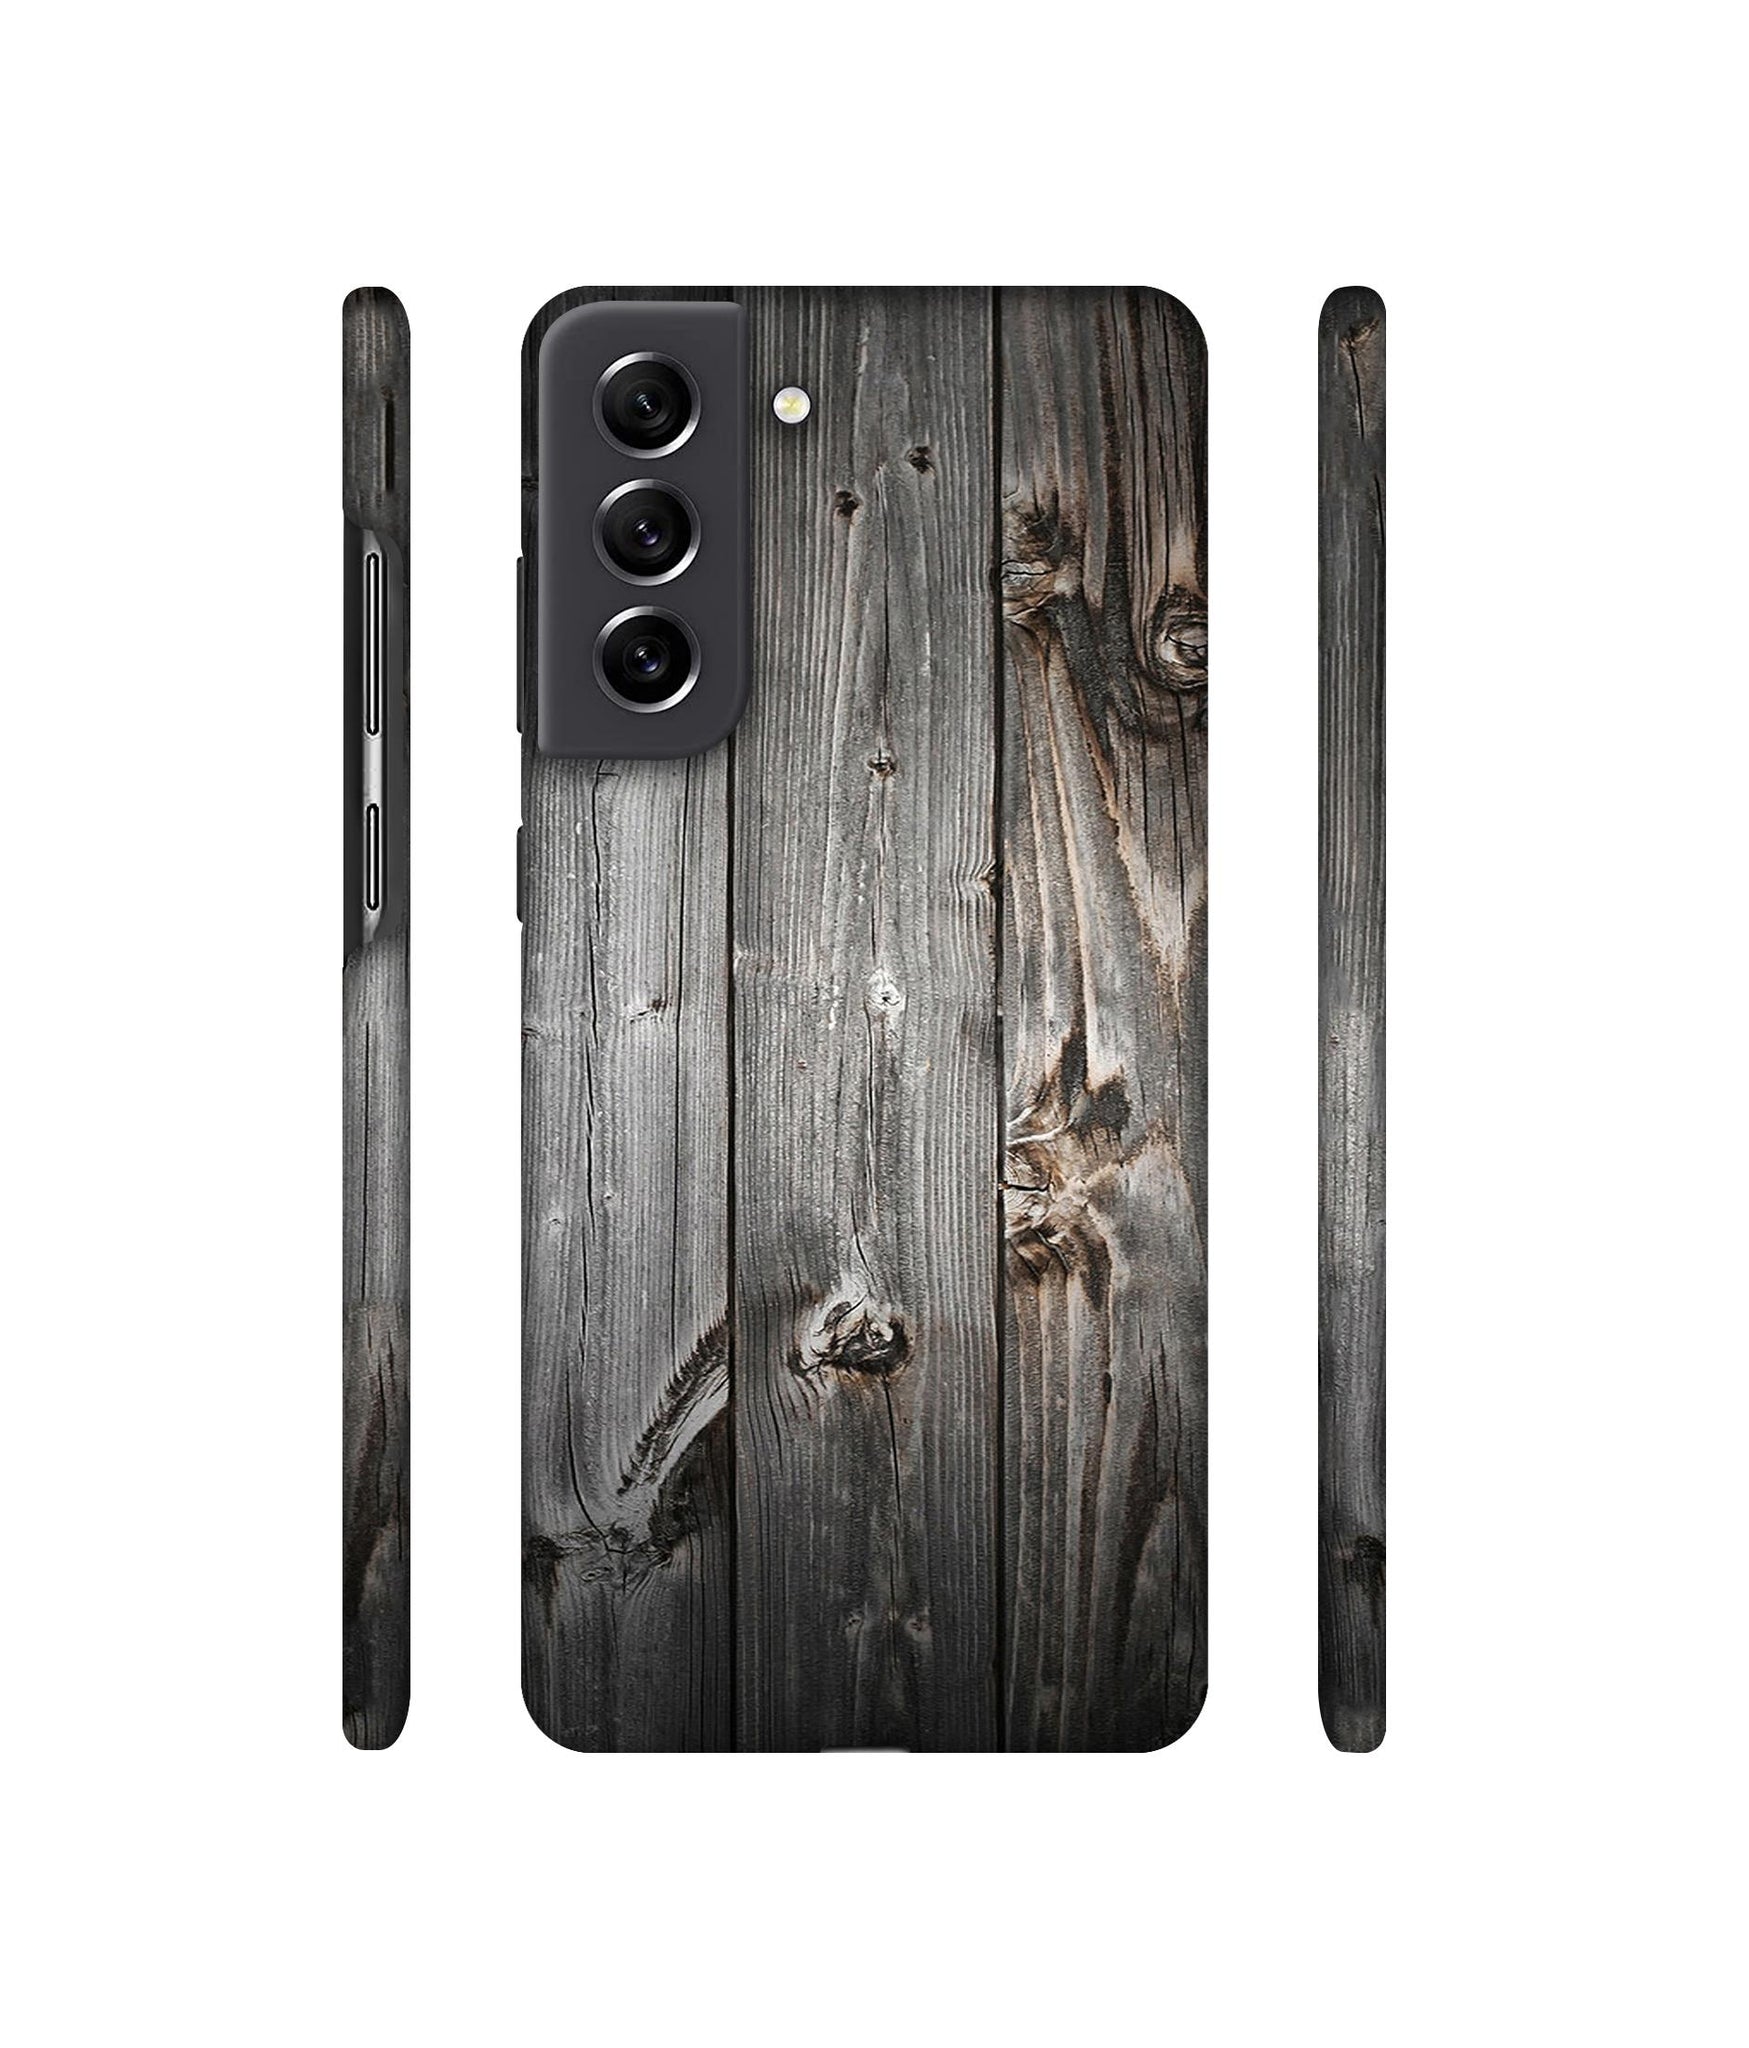 Grey Wooden Texture Designer Hard Back Cover for Samsung Galaxy S21 FE 5G